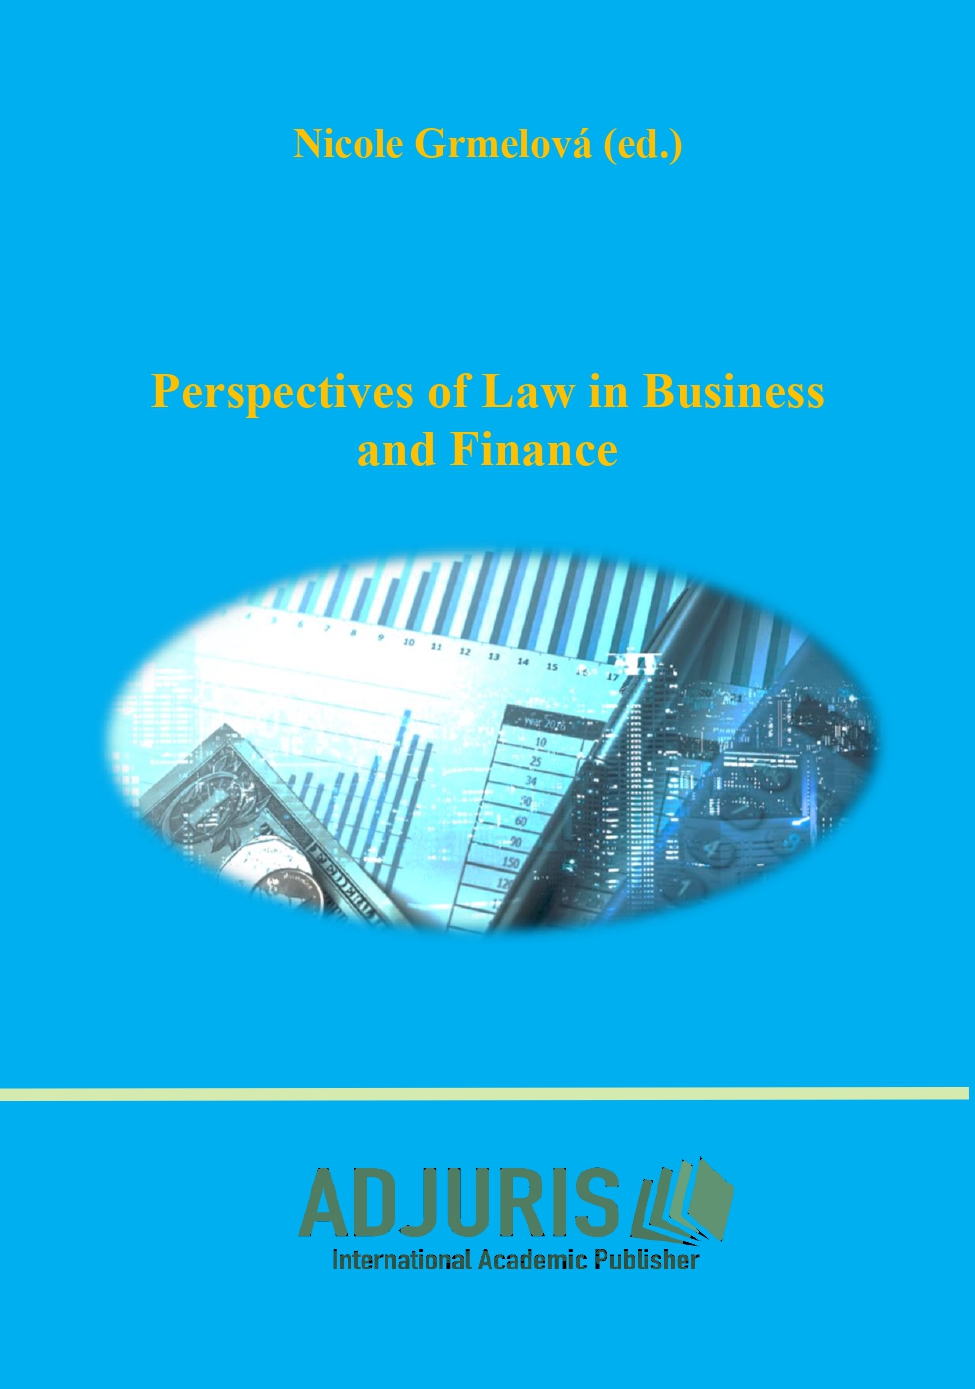 Perspectives of Law in Business and Finance.
Conference proceedings: 14th International Scientific Conference "Law in Business of Selected Member States of the European Union", November 3-4, 2022, Prague, Czech Republic